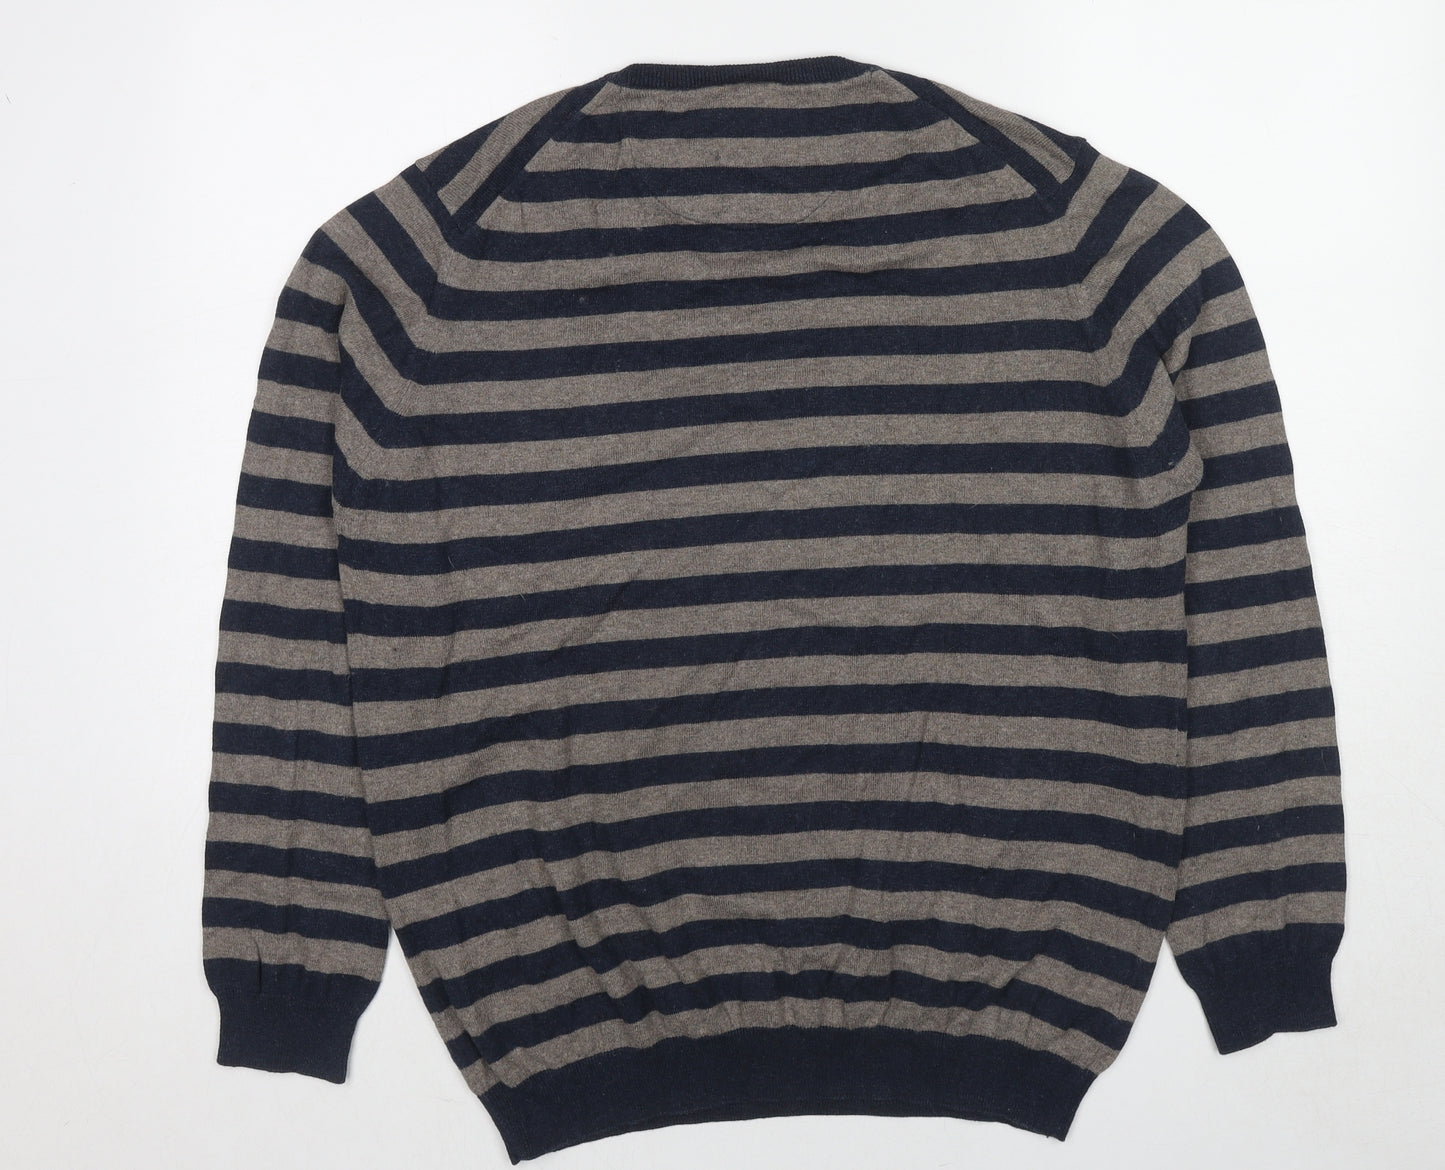 John Lewis Mens Multicoloured Round Neck Striped Cotton Pullover Jumper Size L Long Sleeve